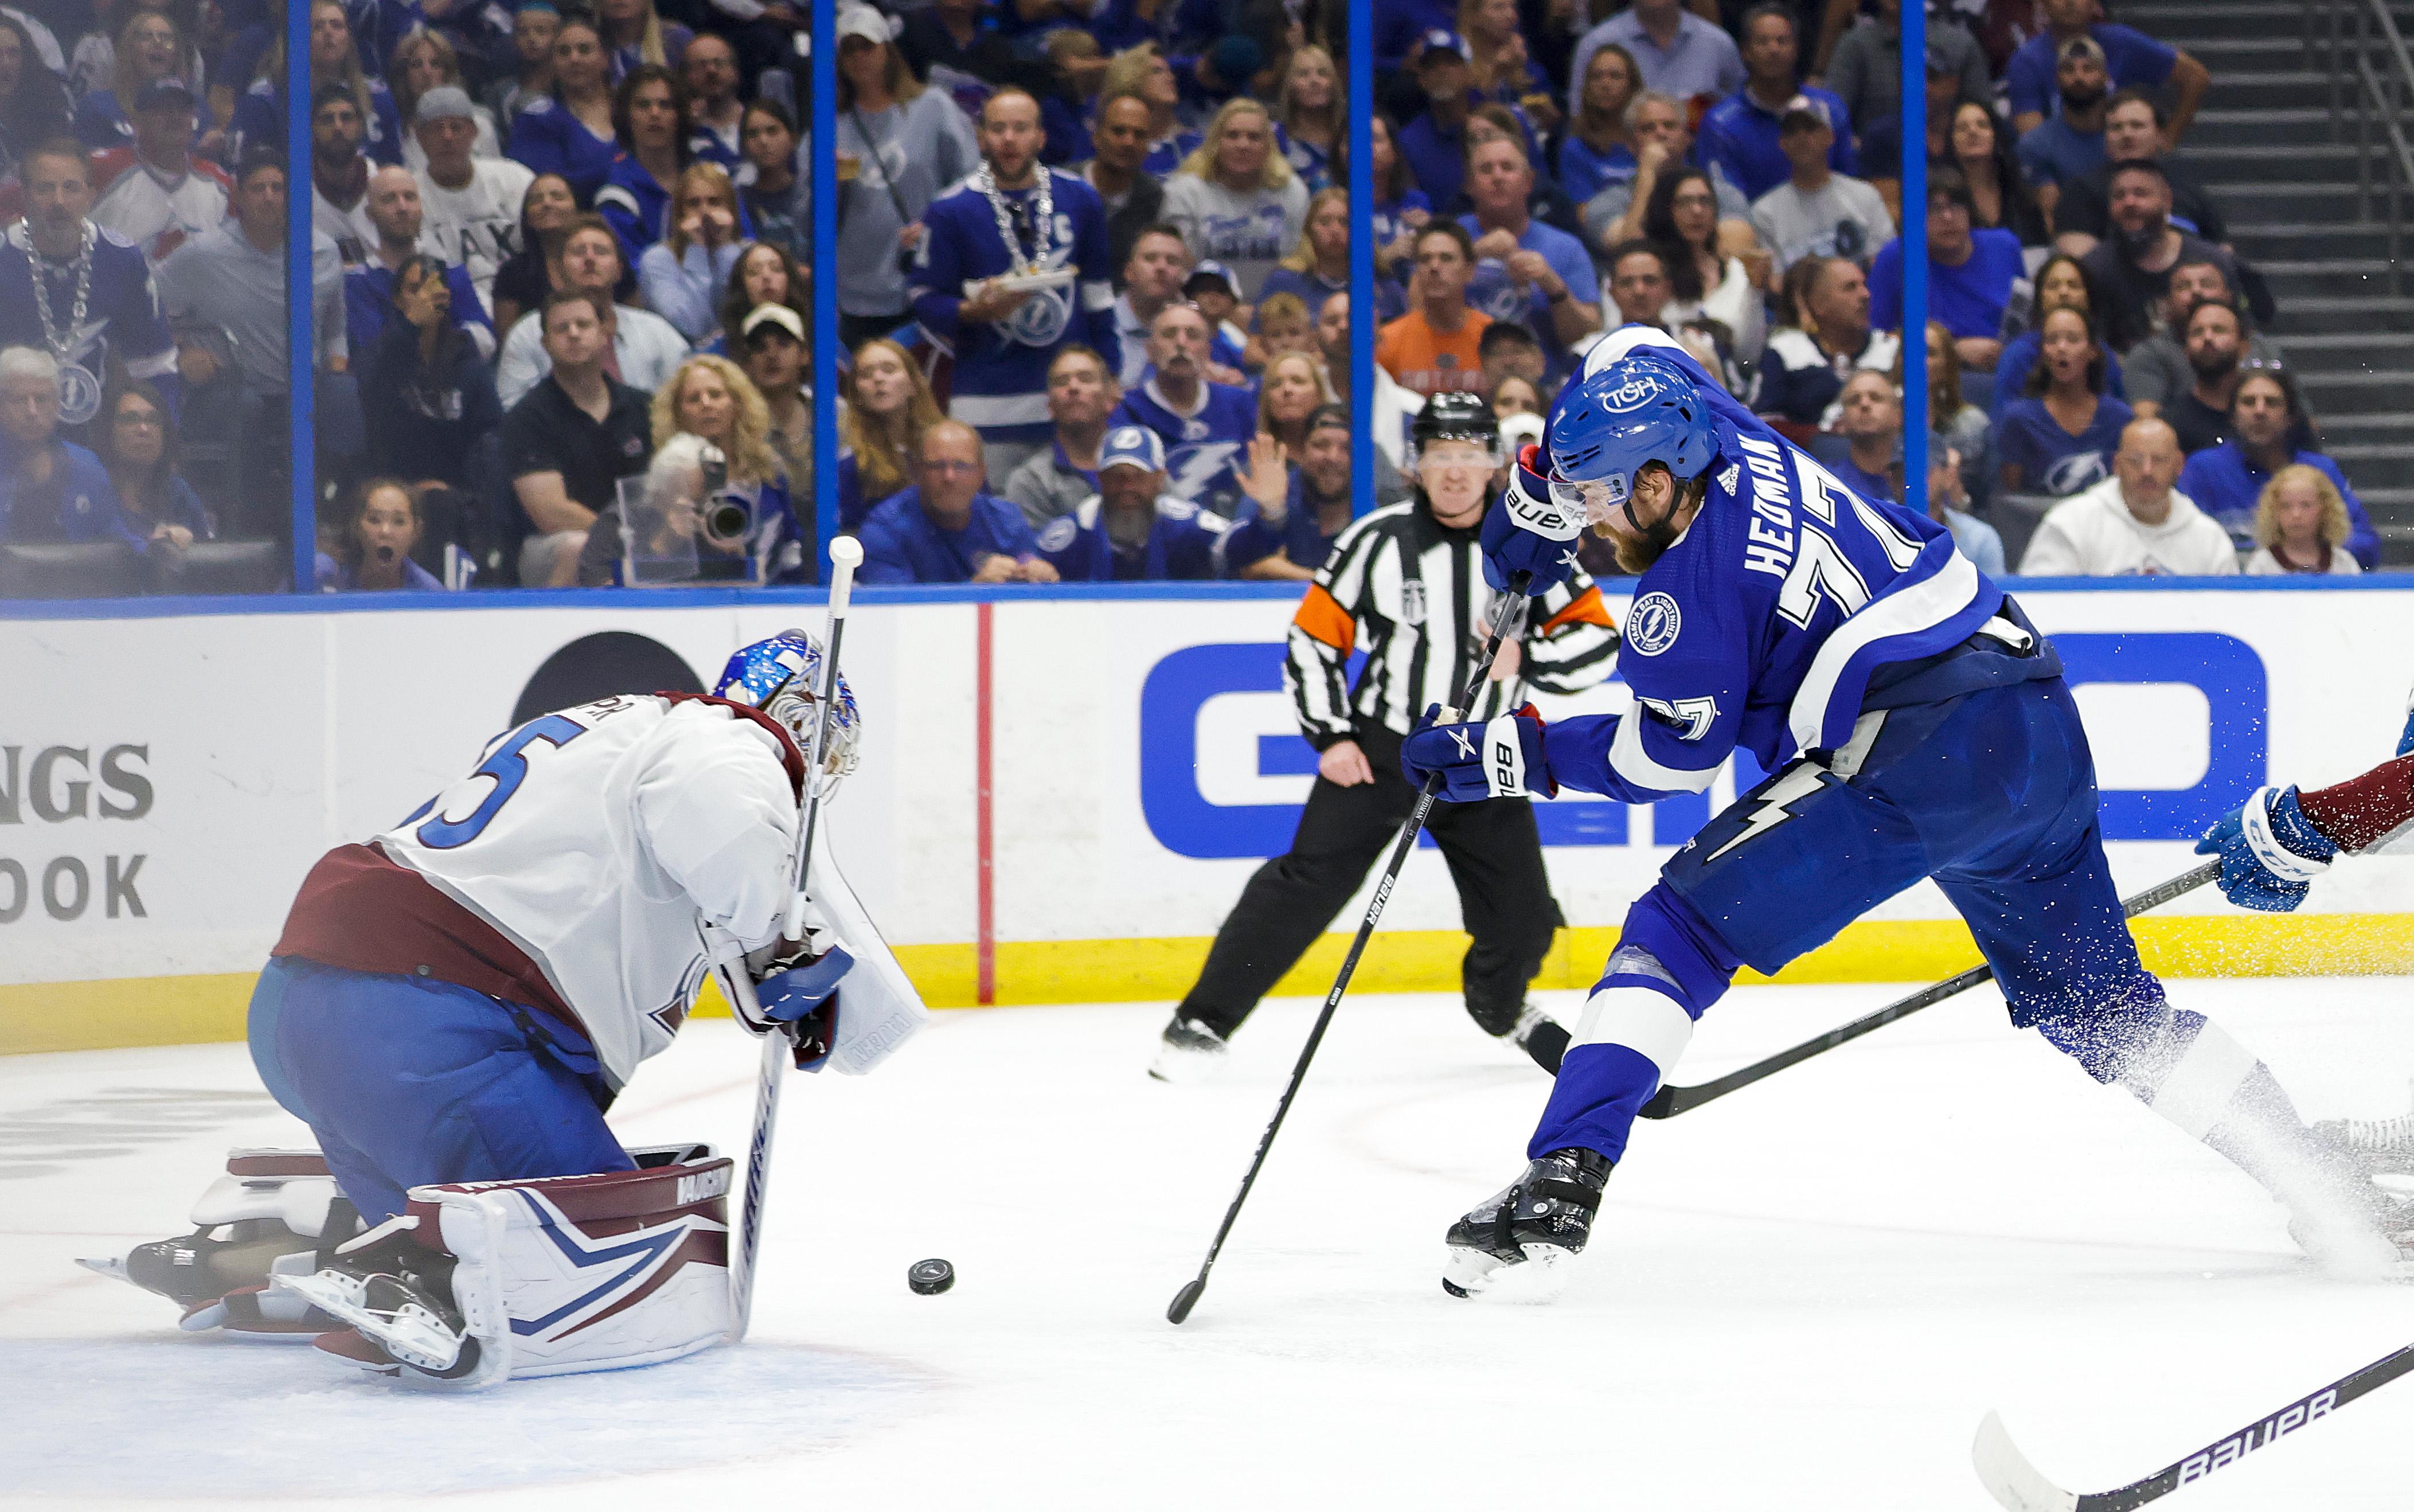 Avalanche vs Lightning Prediction, Odds, Line & Prop Bets for Stanley Cup Final Game 6 on FanDuel (June 26)